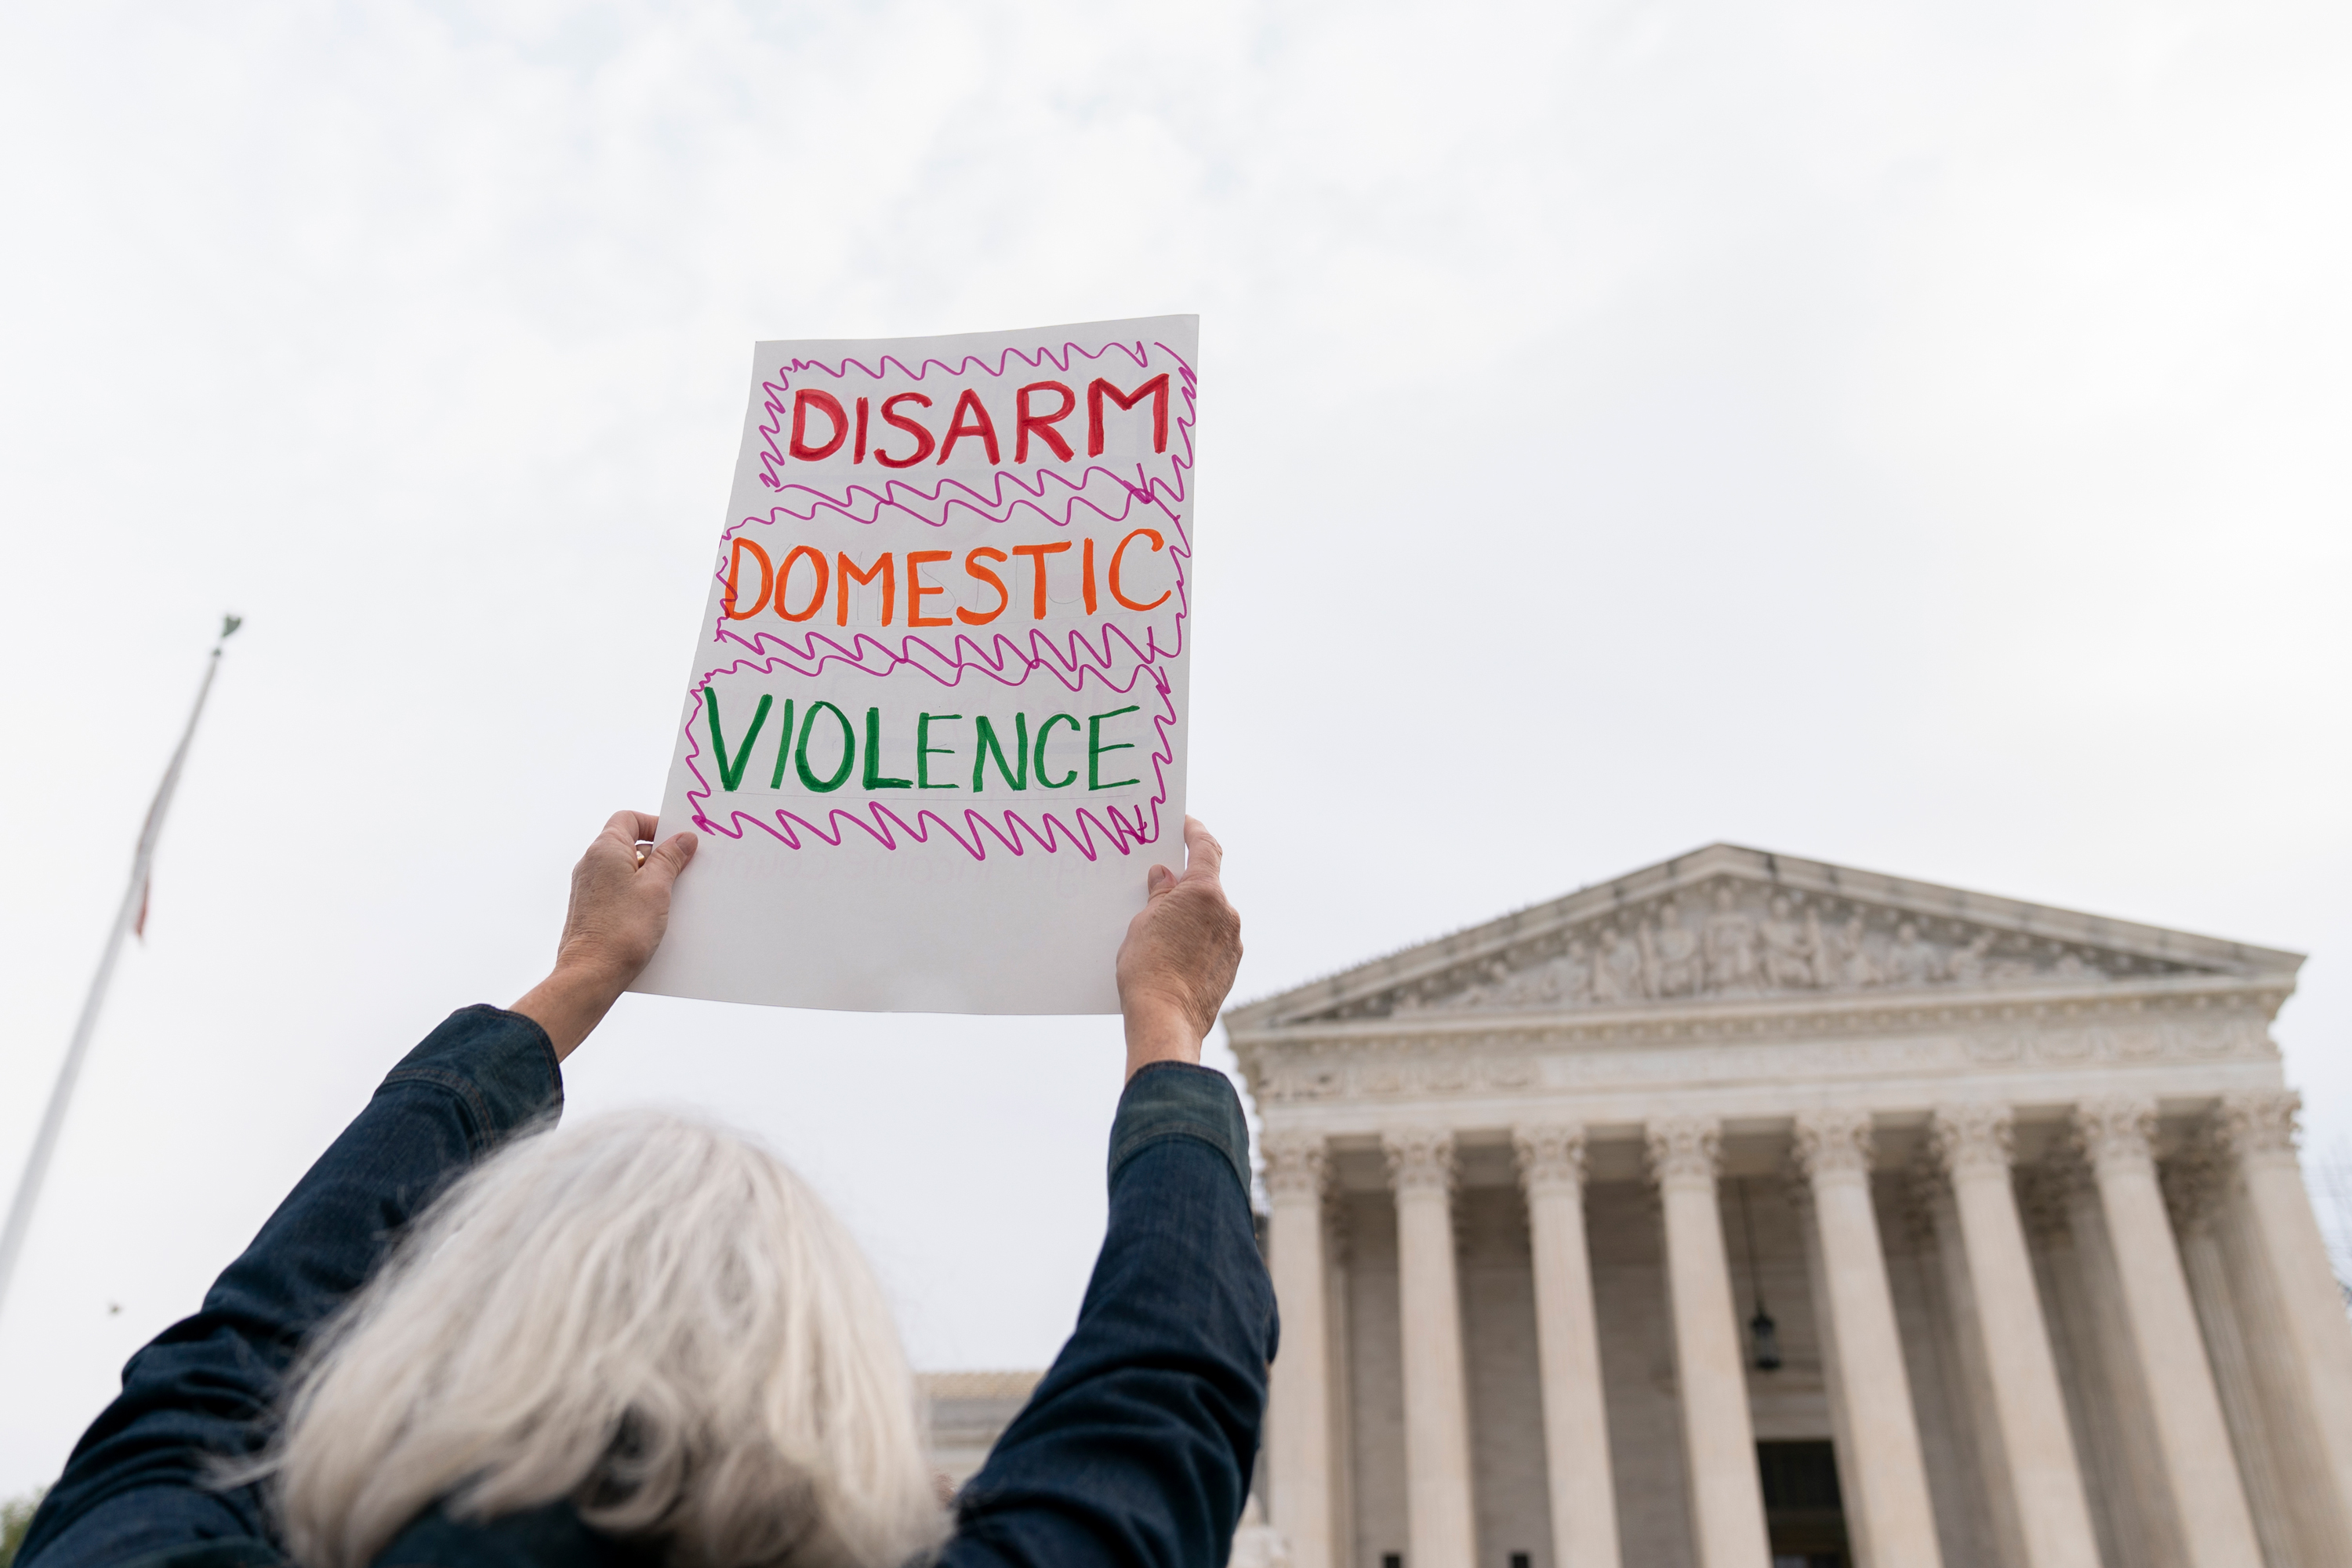 Gun safety and domestic violence prevention organizations gather outside of the Supreme Court before oral arguments are heard in United States v. Rahimi on November 7 in Washington, DC.